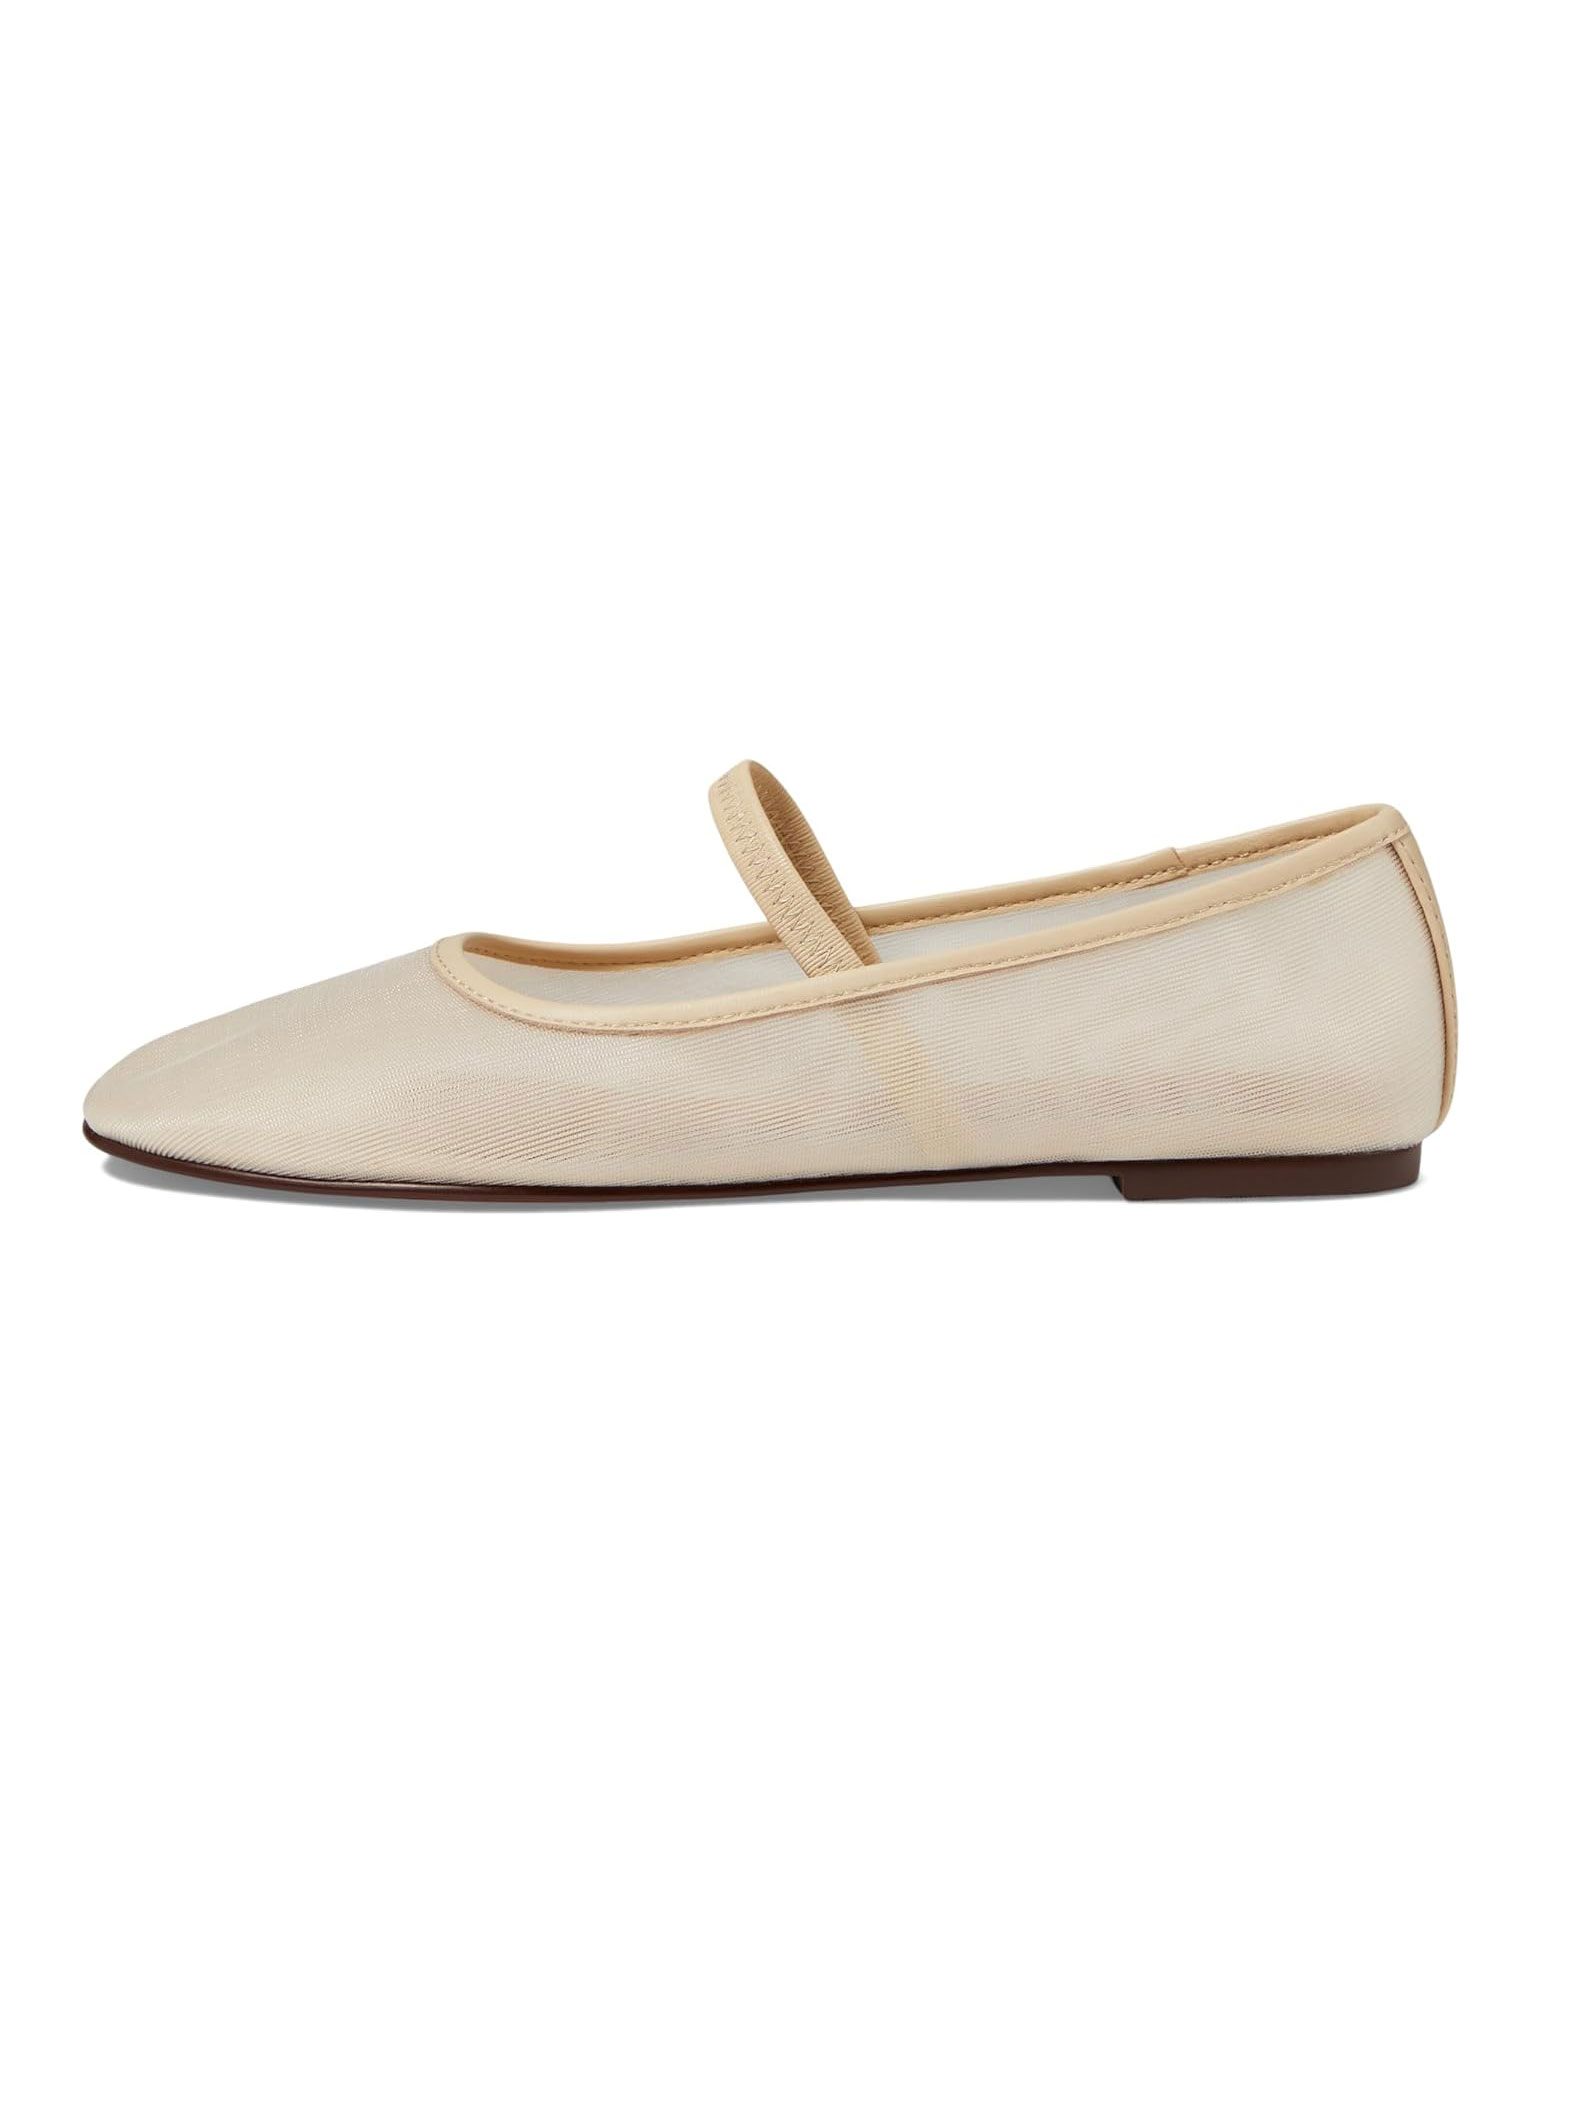 beige mesh mary jane flats by madewell